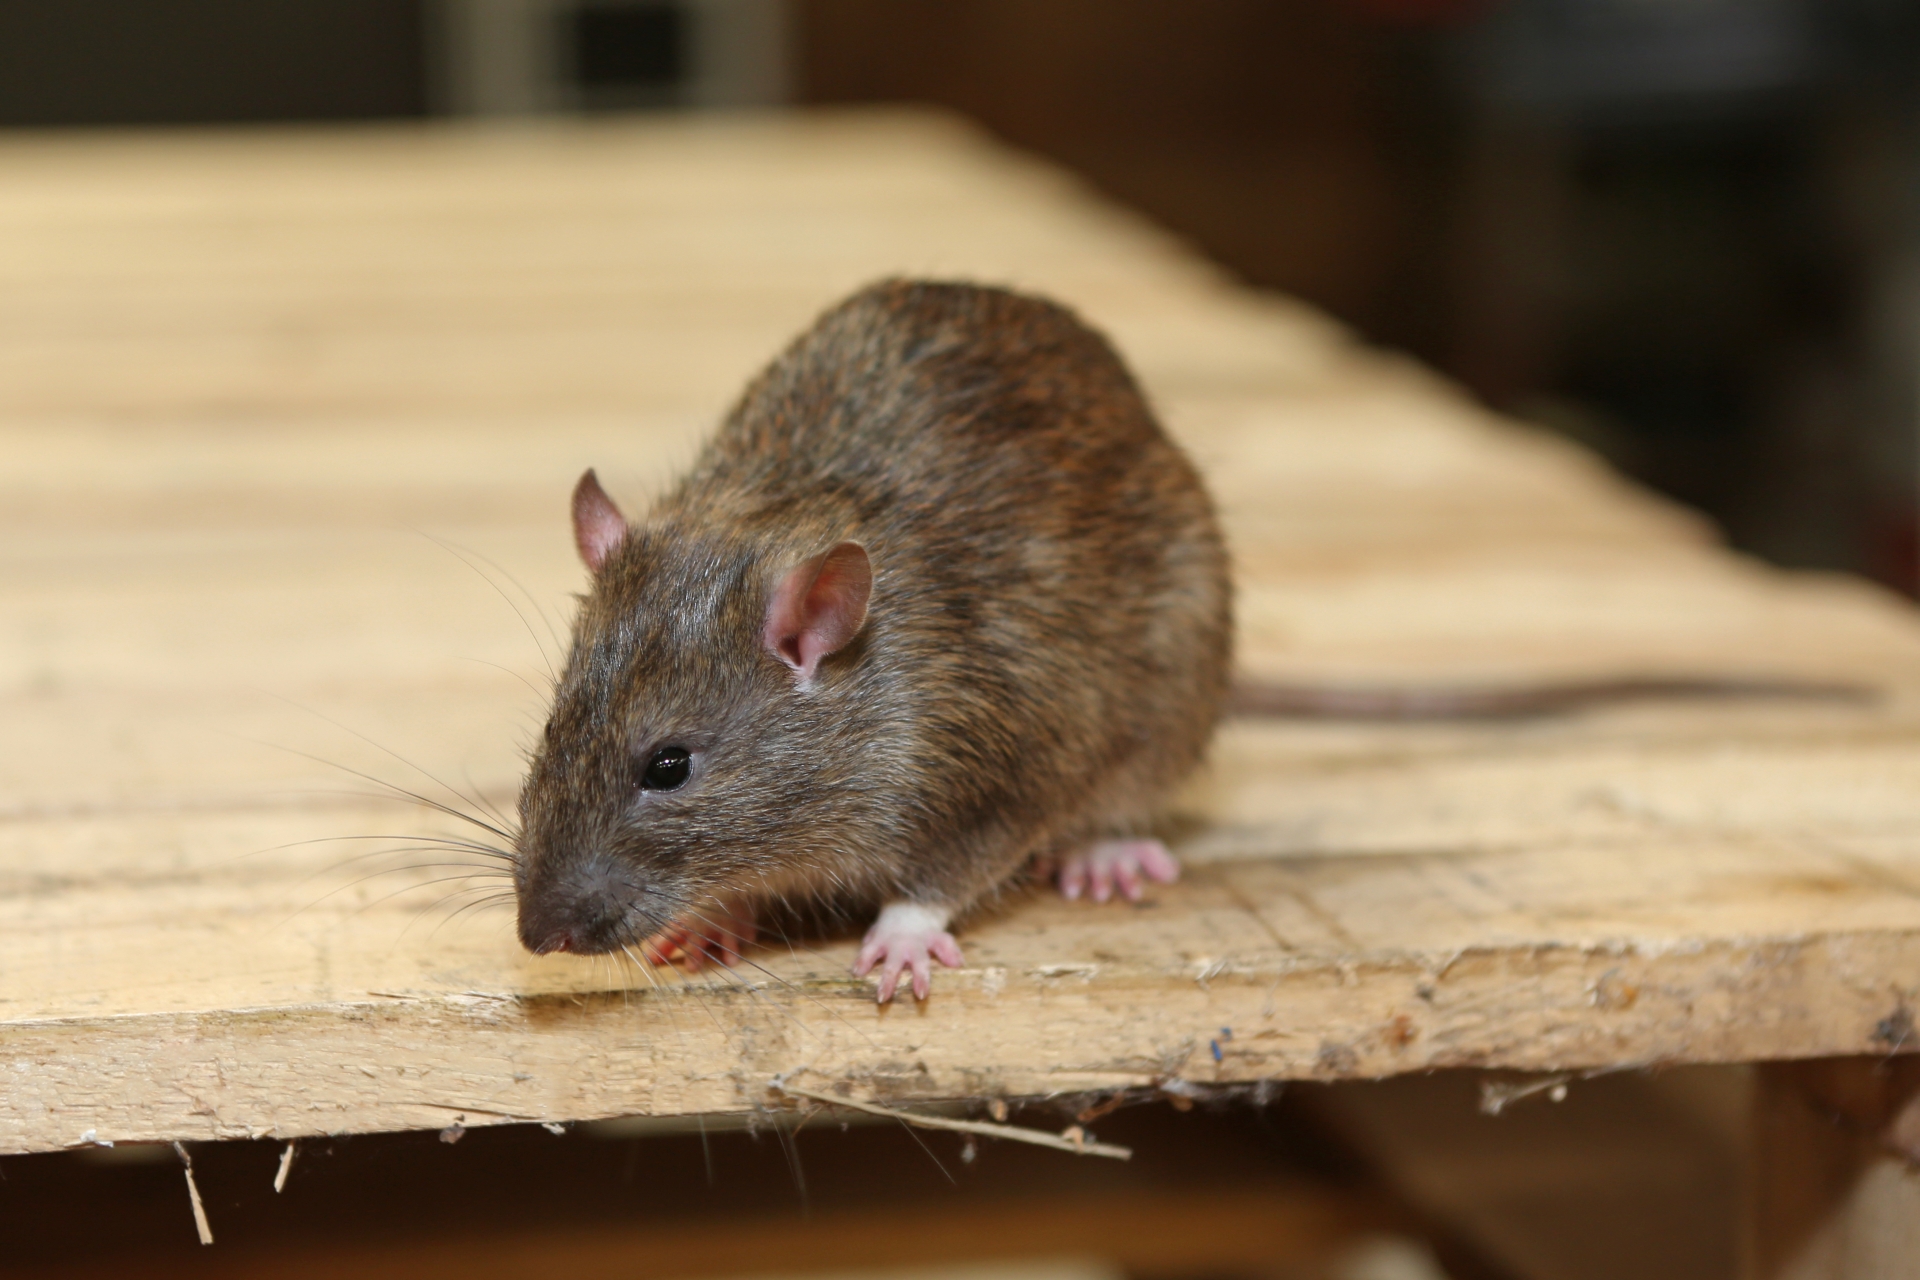 Rat Control, Pest Control in Dulwich, SE21. Call Now 020 8166 9746